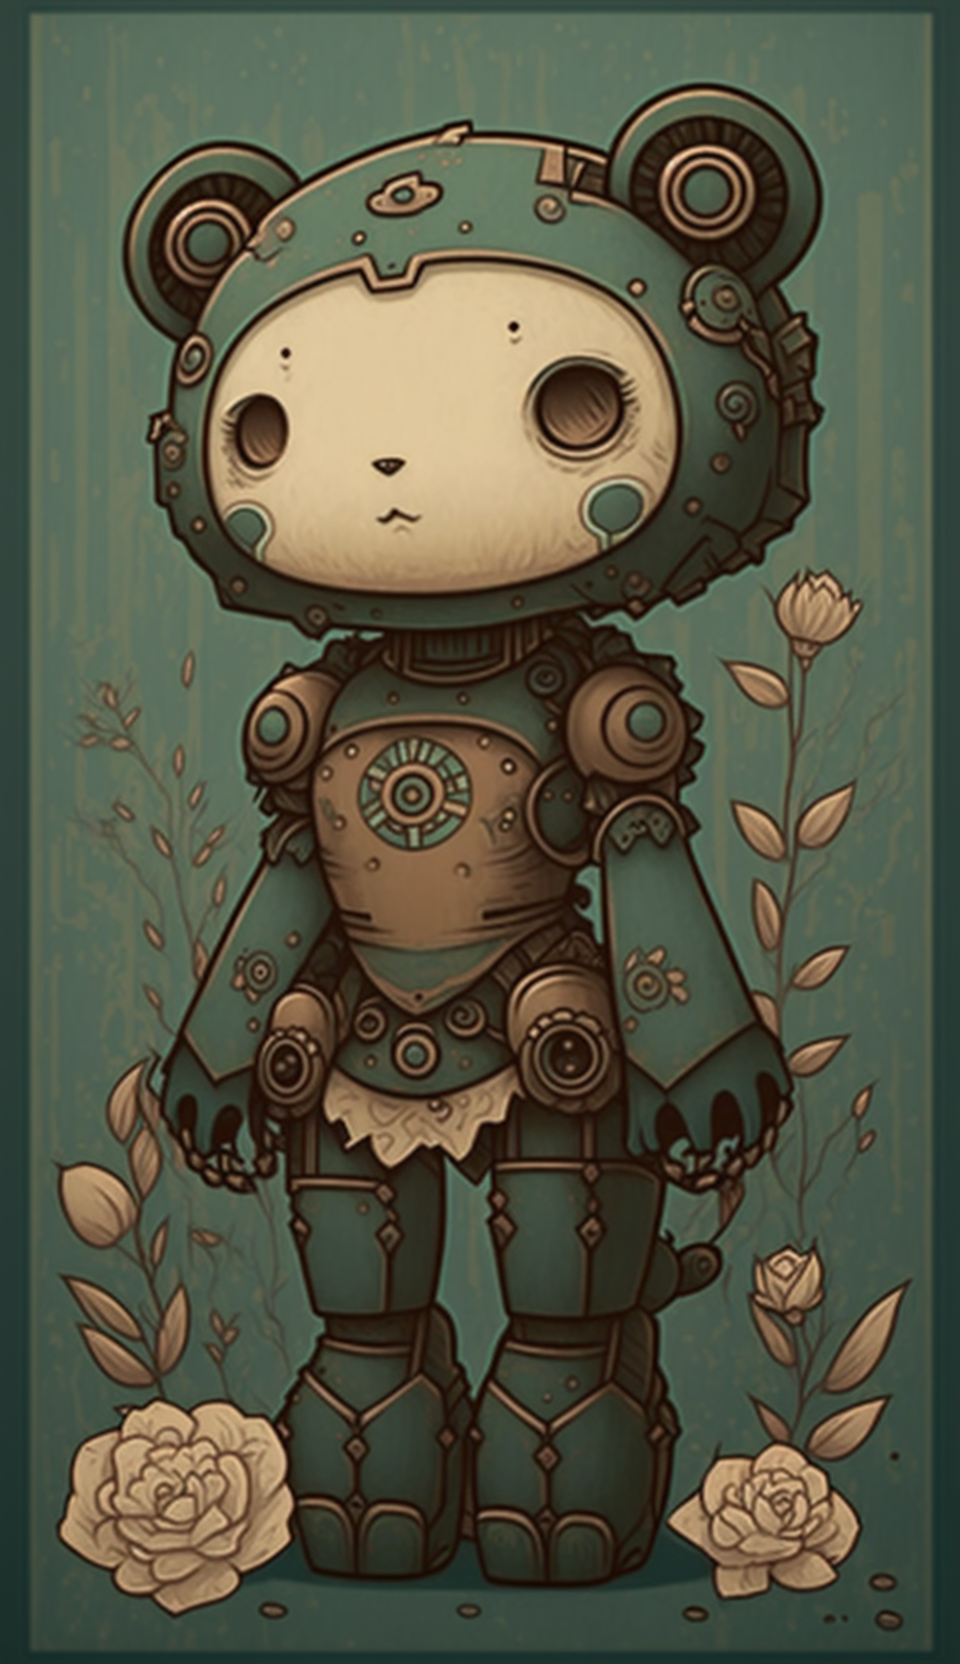 soupcan13_robot_bear_mech_in_the_style_of_Audrey_Kawasaki_82a01ed4-84db-44cd-936c-852242a9076a.png